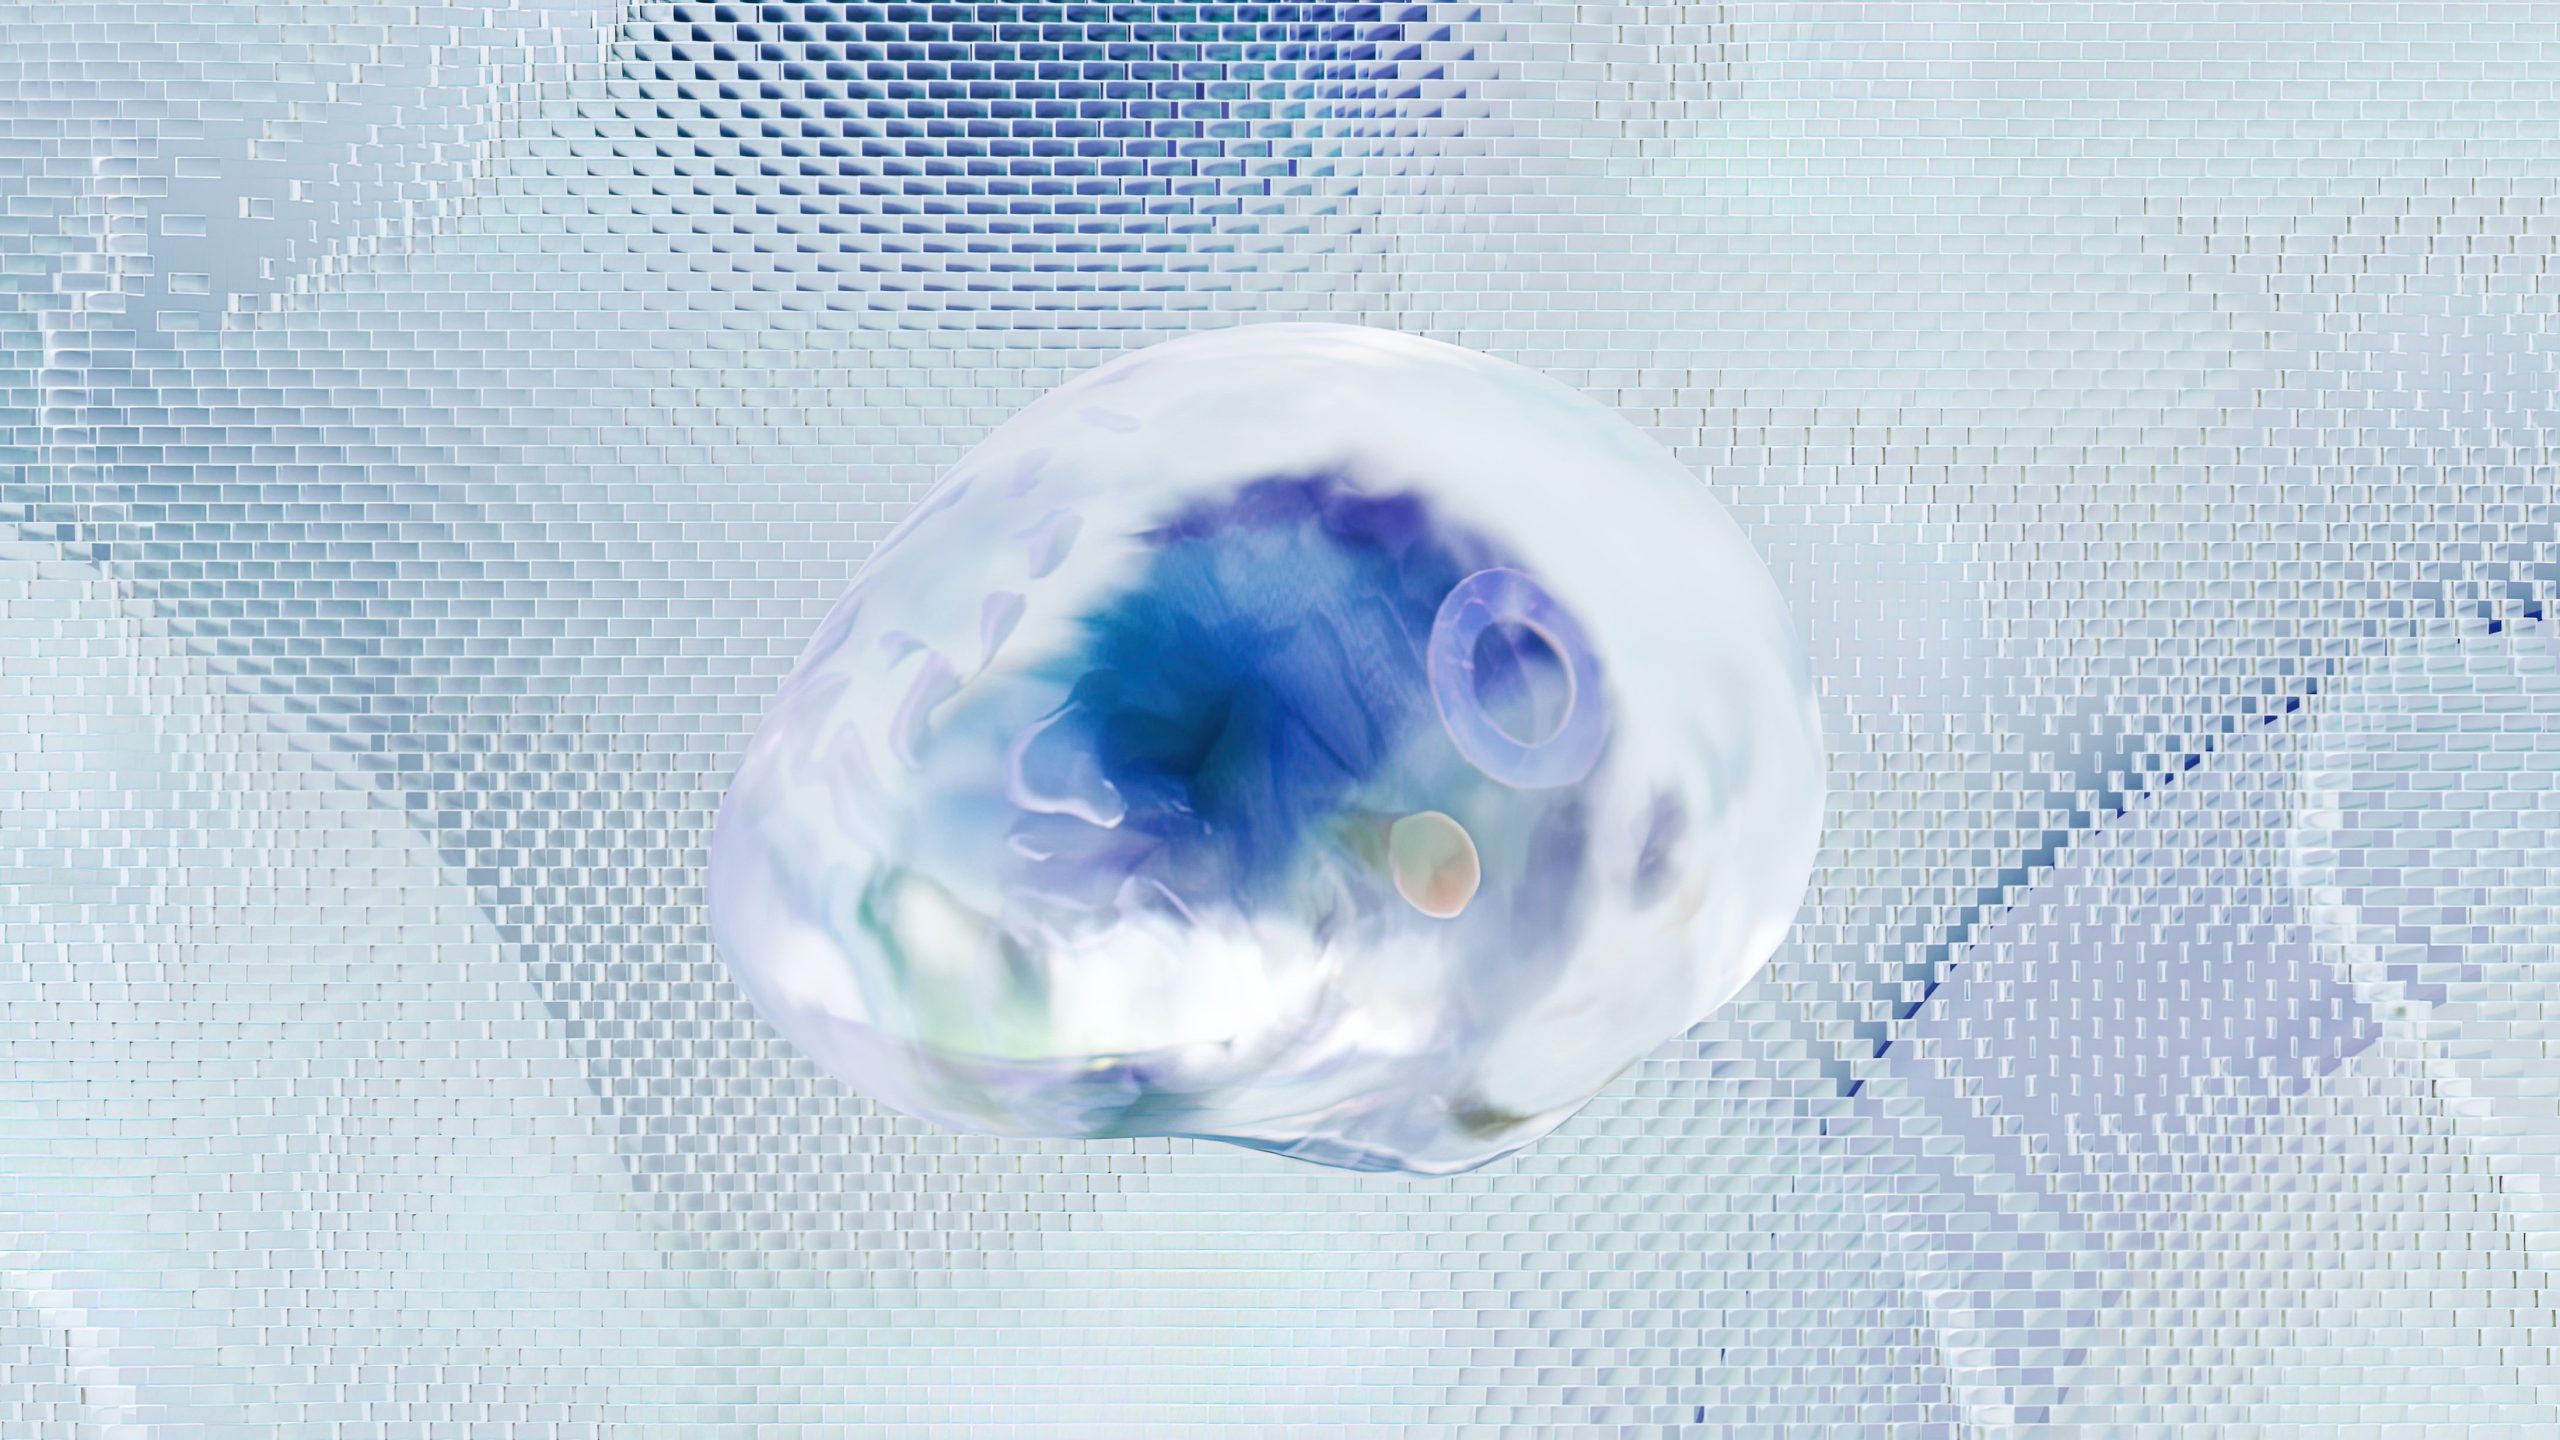 Digital image featuring a surreal-like artificial brain against a background that has wavy lines and looks very cerebral.